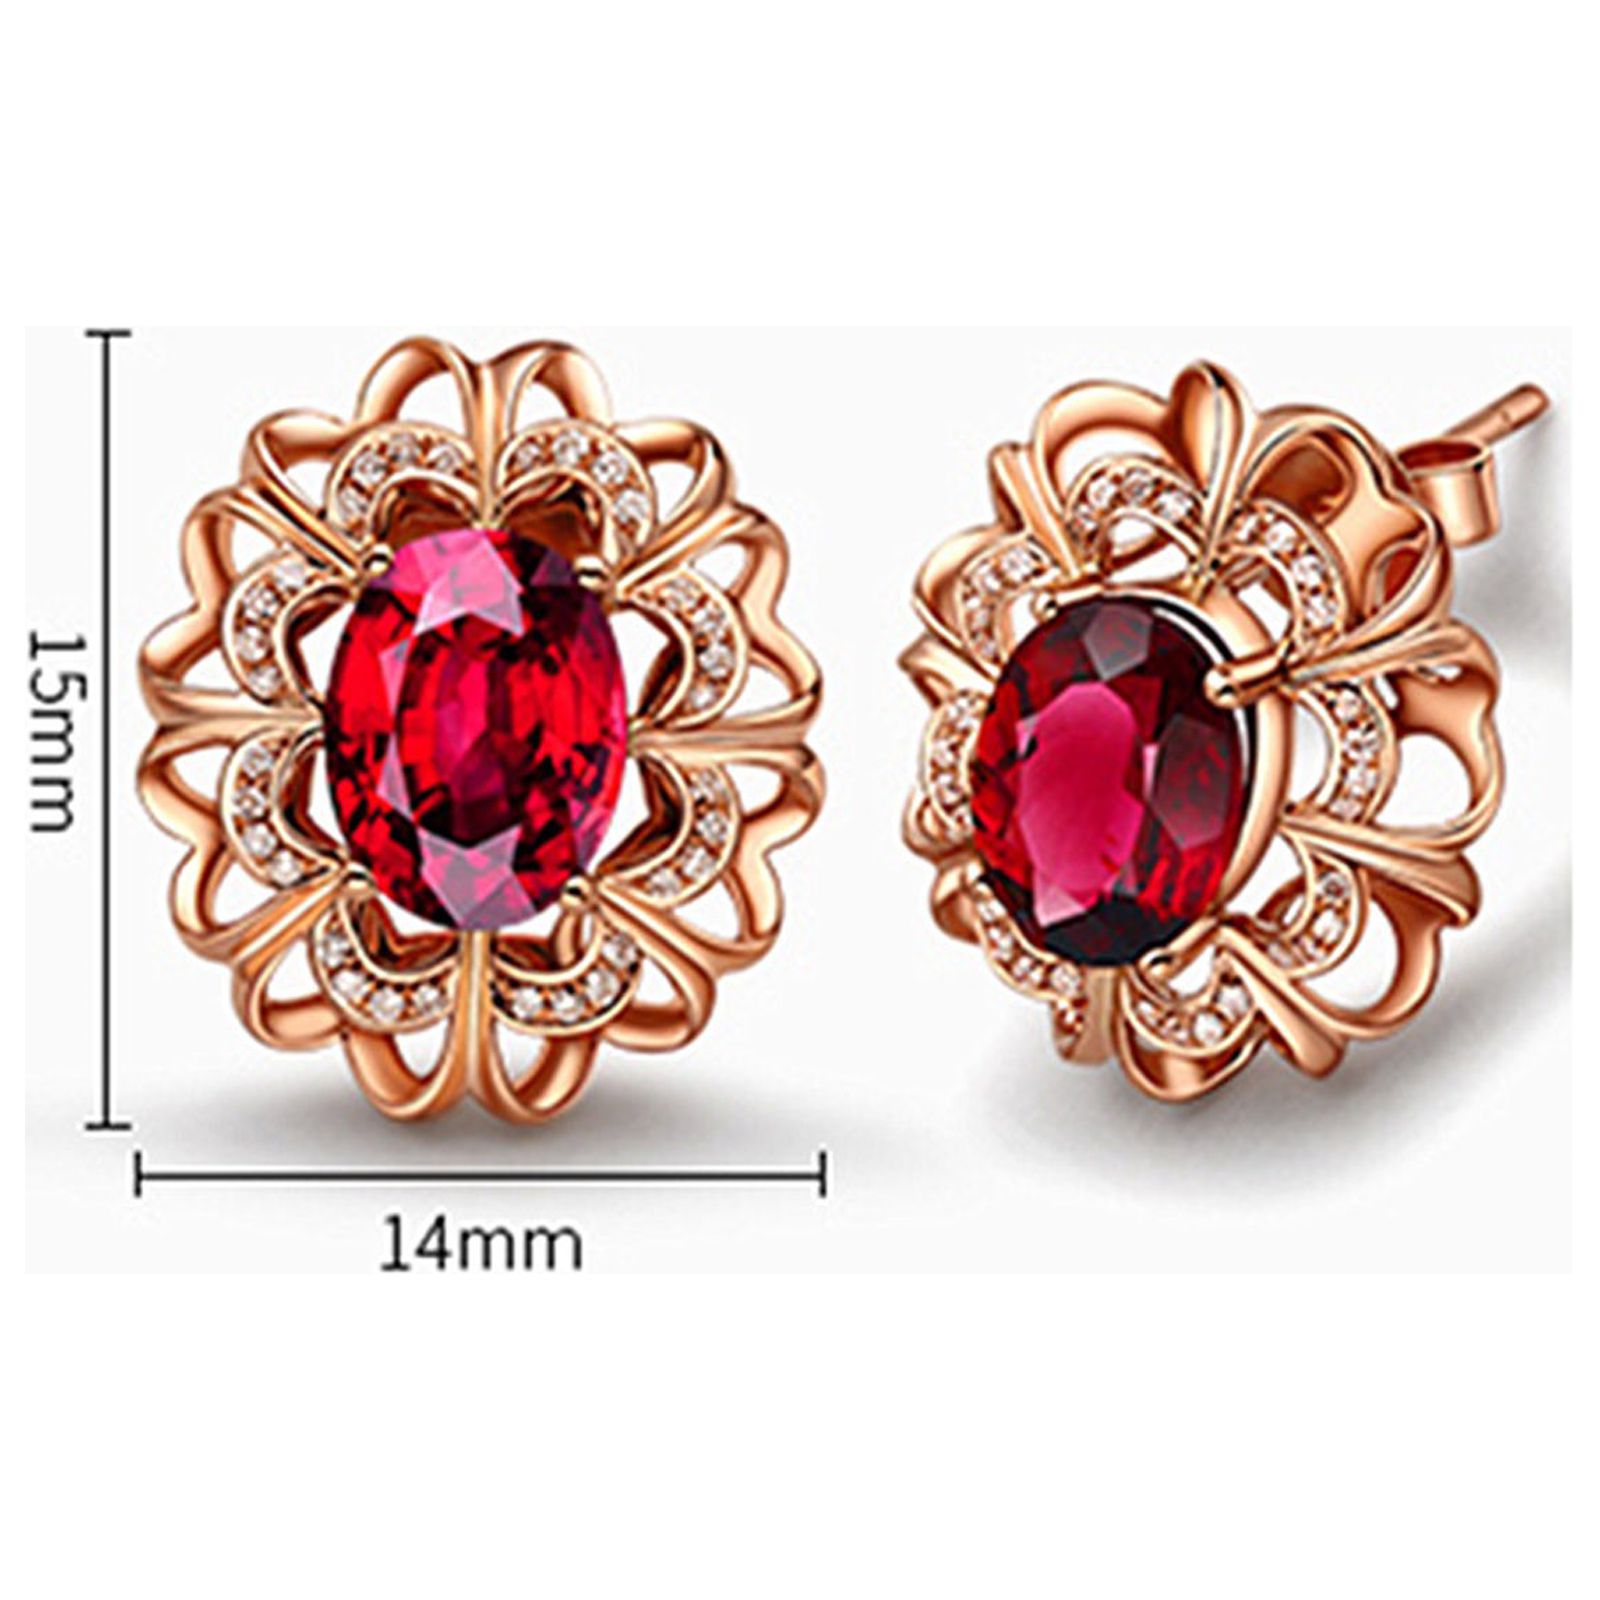 Kayannuo Christmas Clearance Red Tourmaline Stud Earrings Color Gold Colorful Stud Earrings Vintage Women's Earrings Fashion Accessories Gifts For Women - image 3 of 8